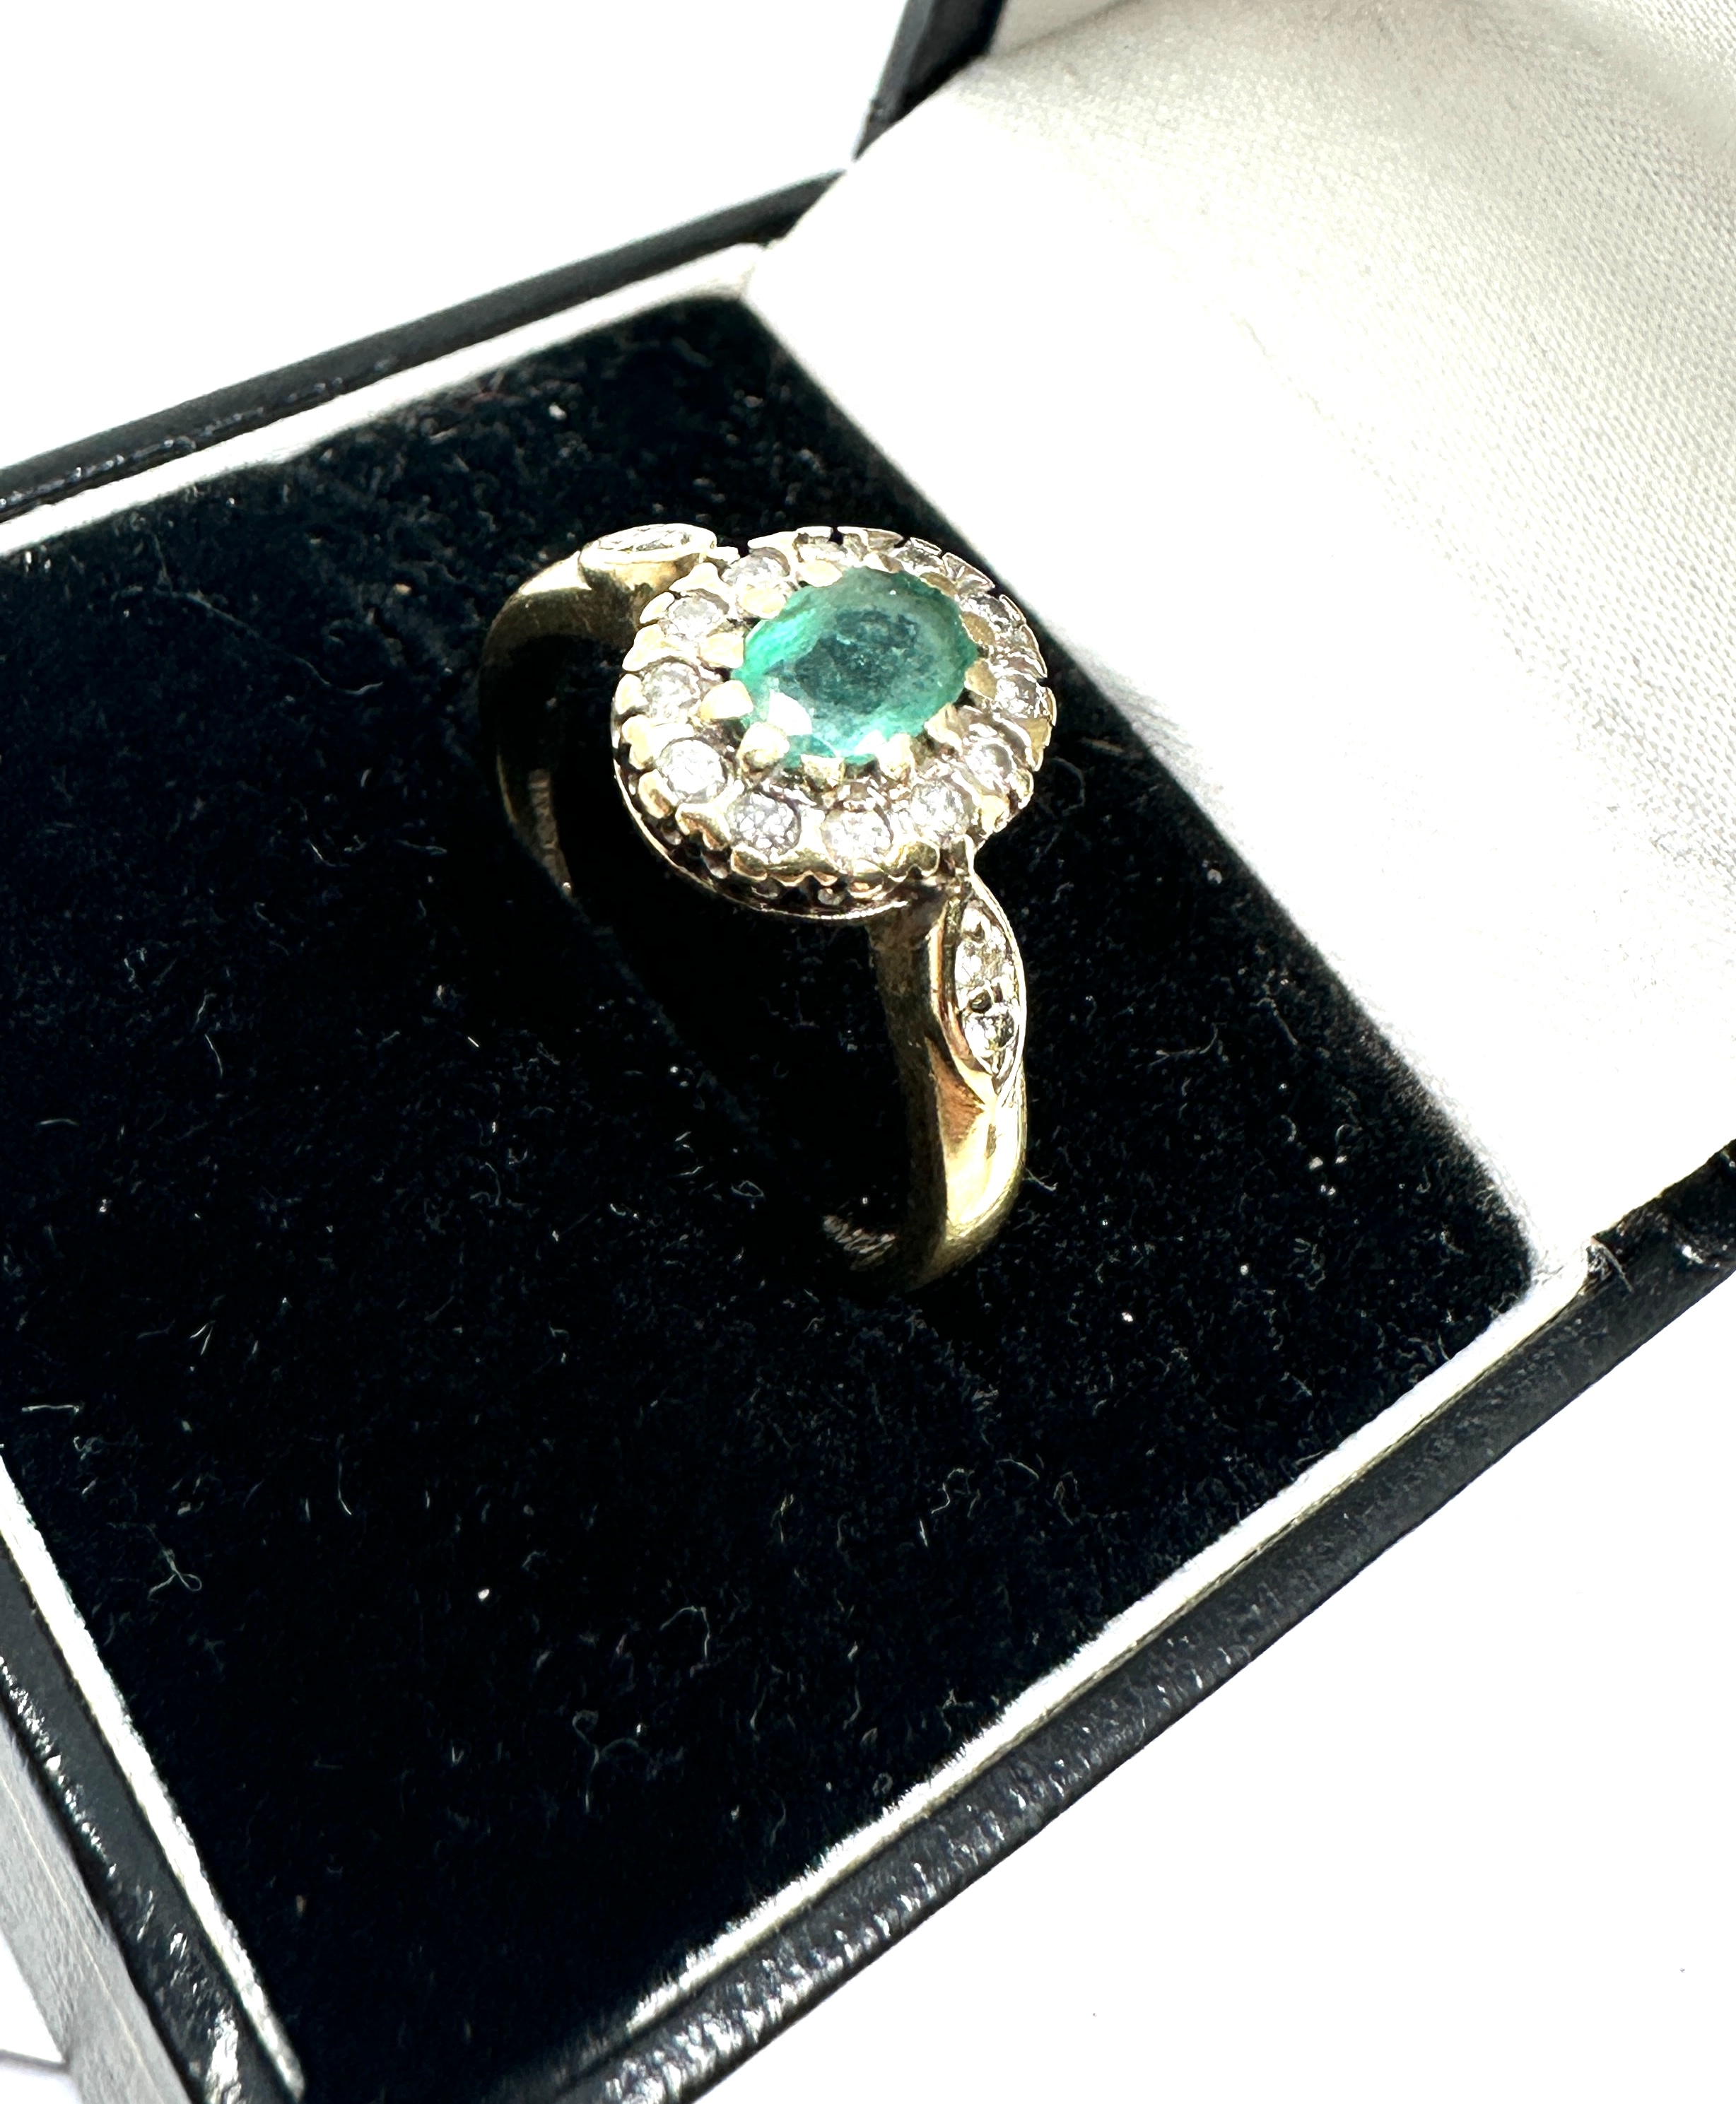 9ct gold emerald & diamond ring weight 3g - Image 3 of 4